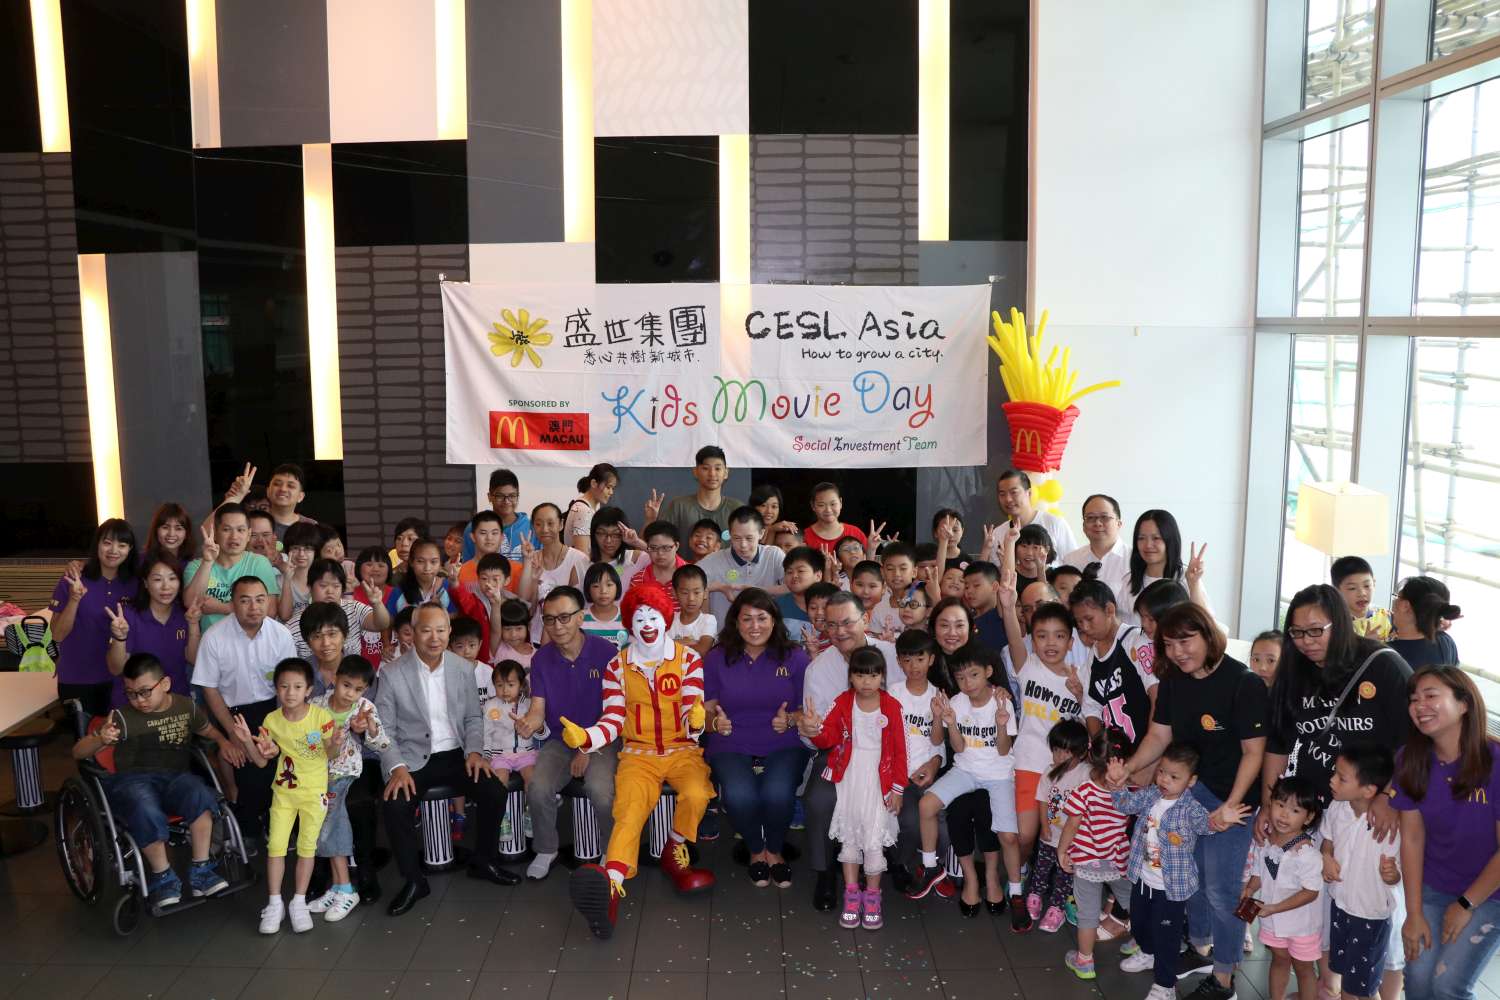 CESL Asia Hosts Kids Movie Day for Local Children Institutions